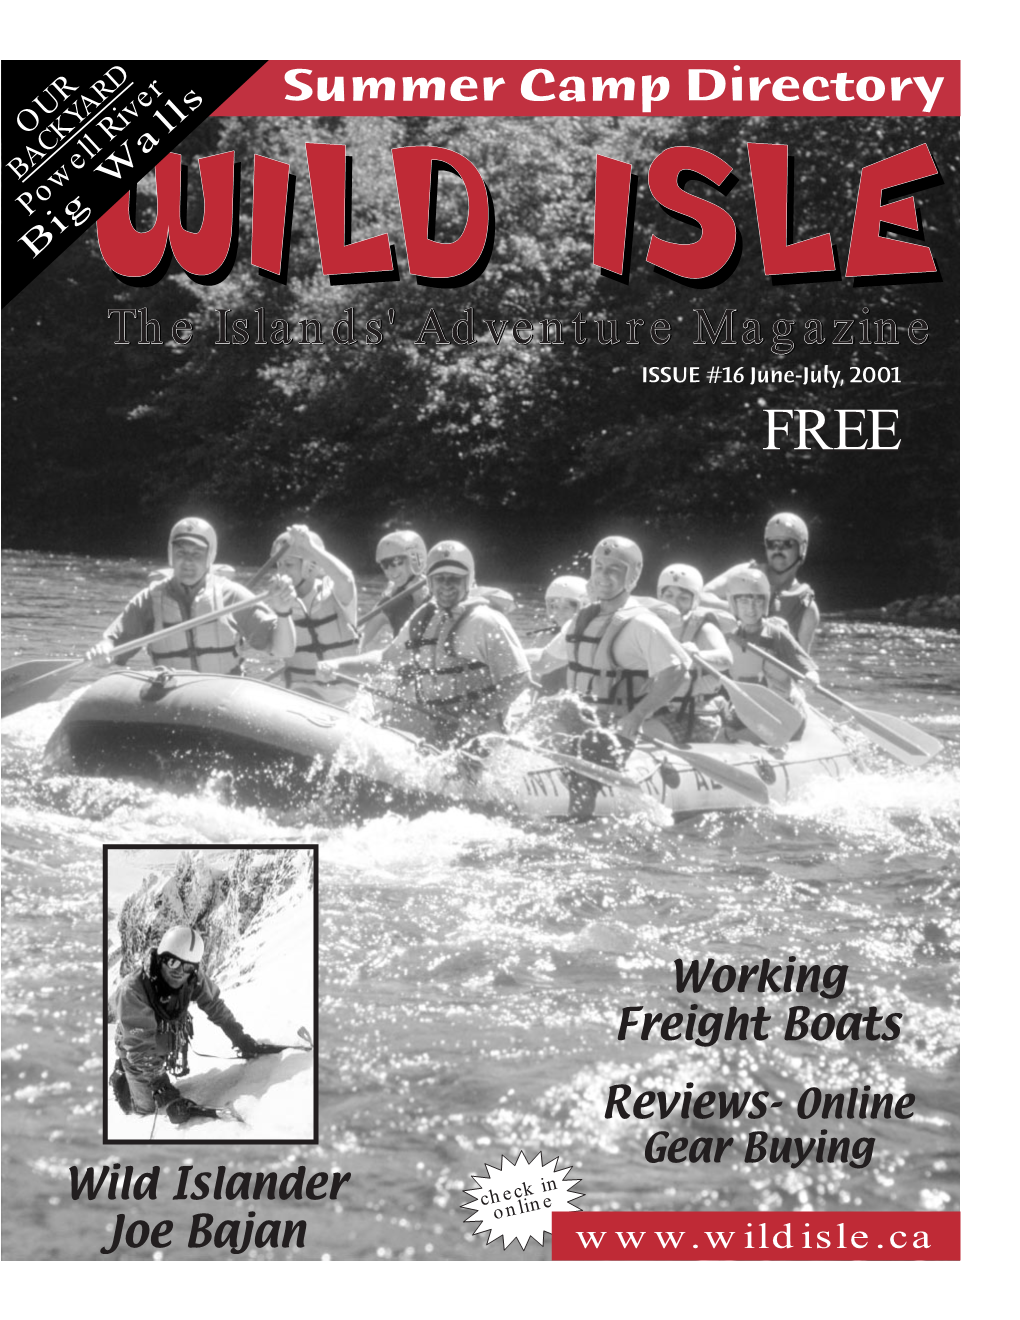 The Islands' Adventure Magazine ISSUE #16 June-July, 2001 FREE